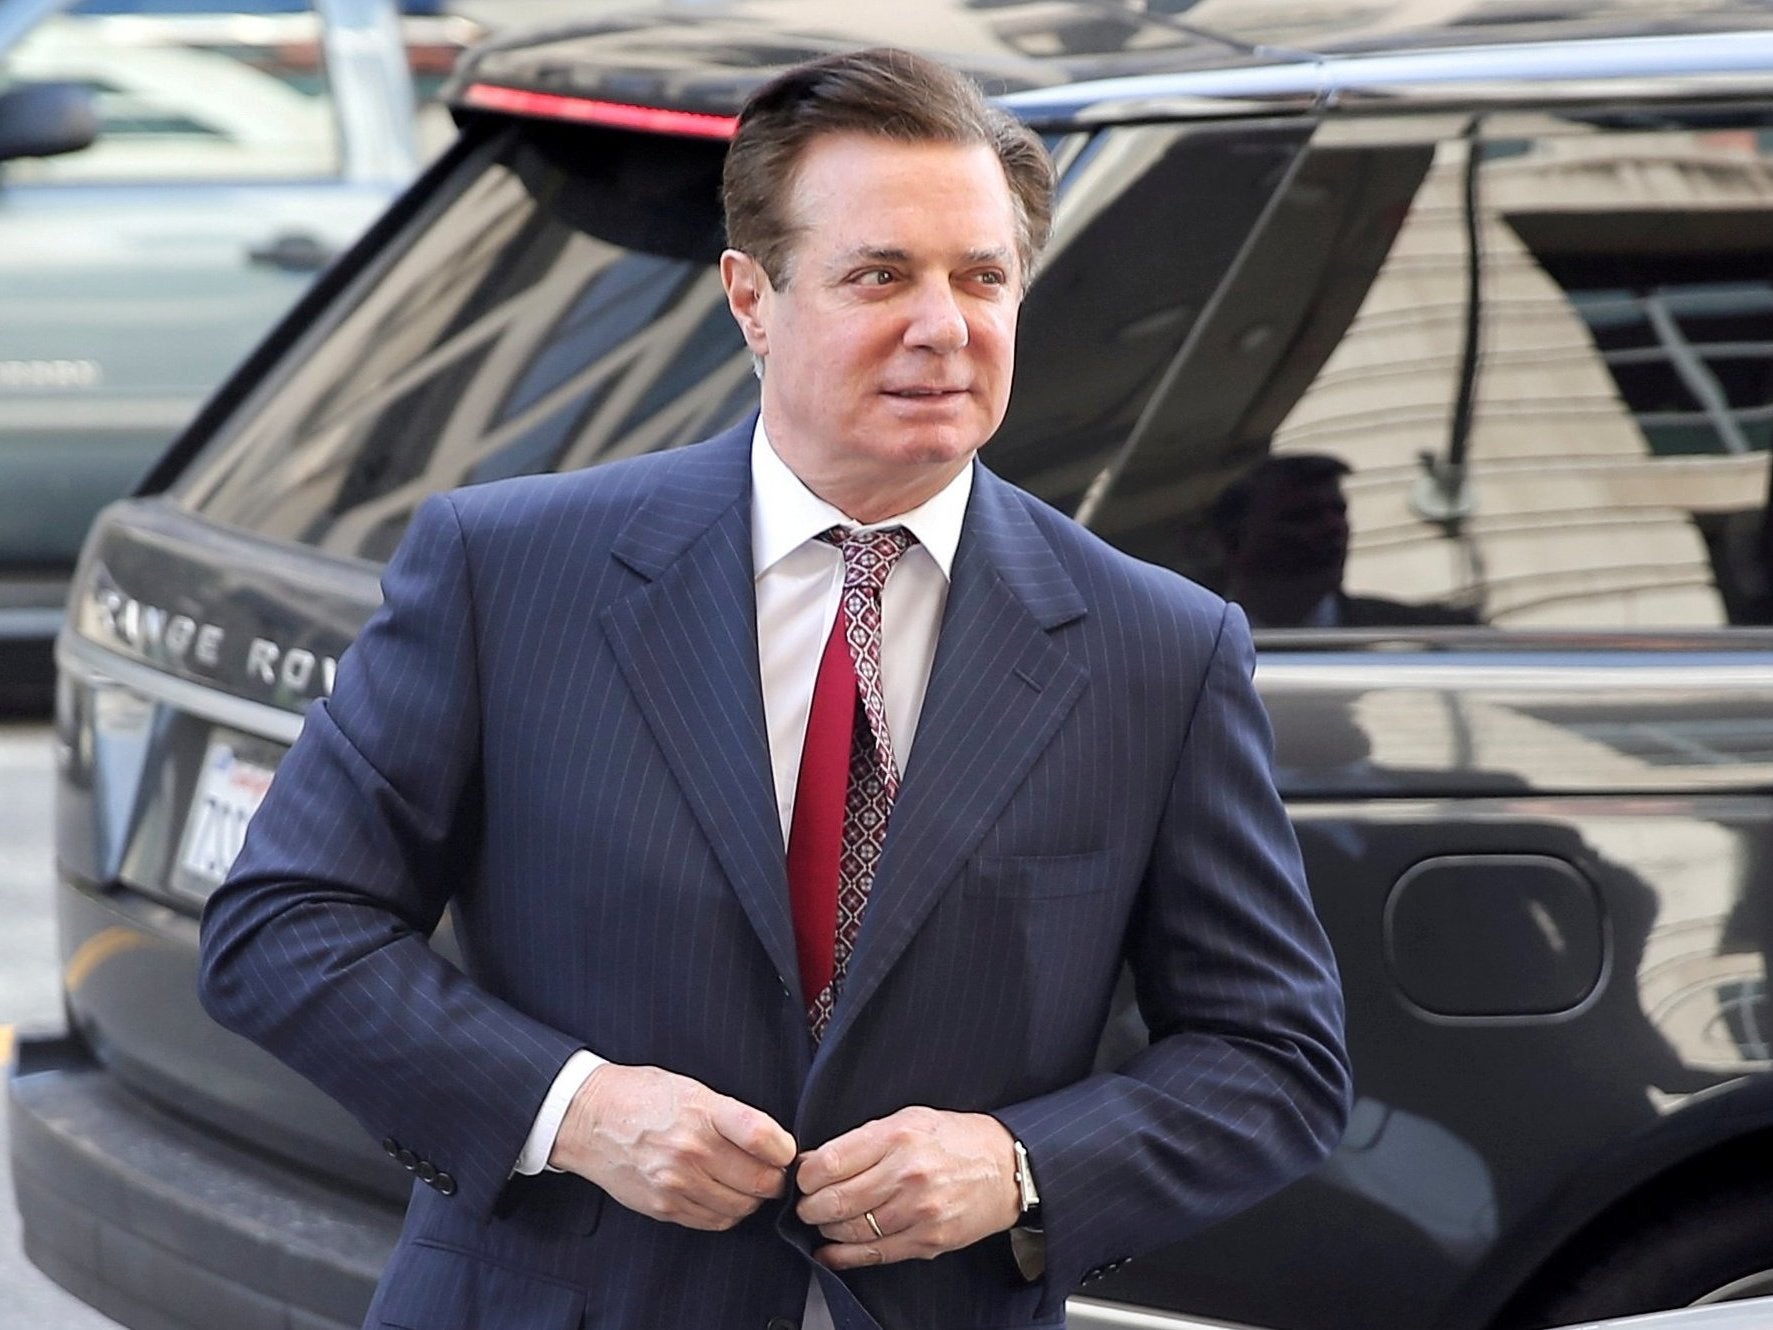 Paul Manafort is the first former Trump aide to face a criminal trial as a result of the Mueller probe